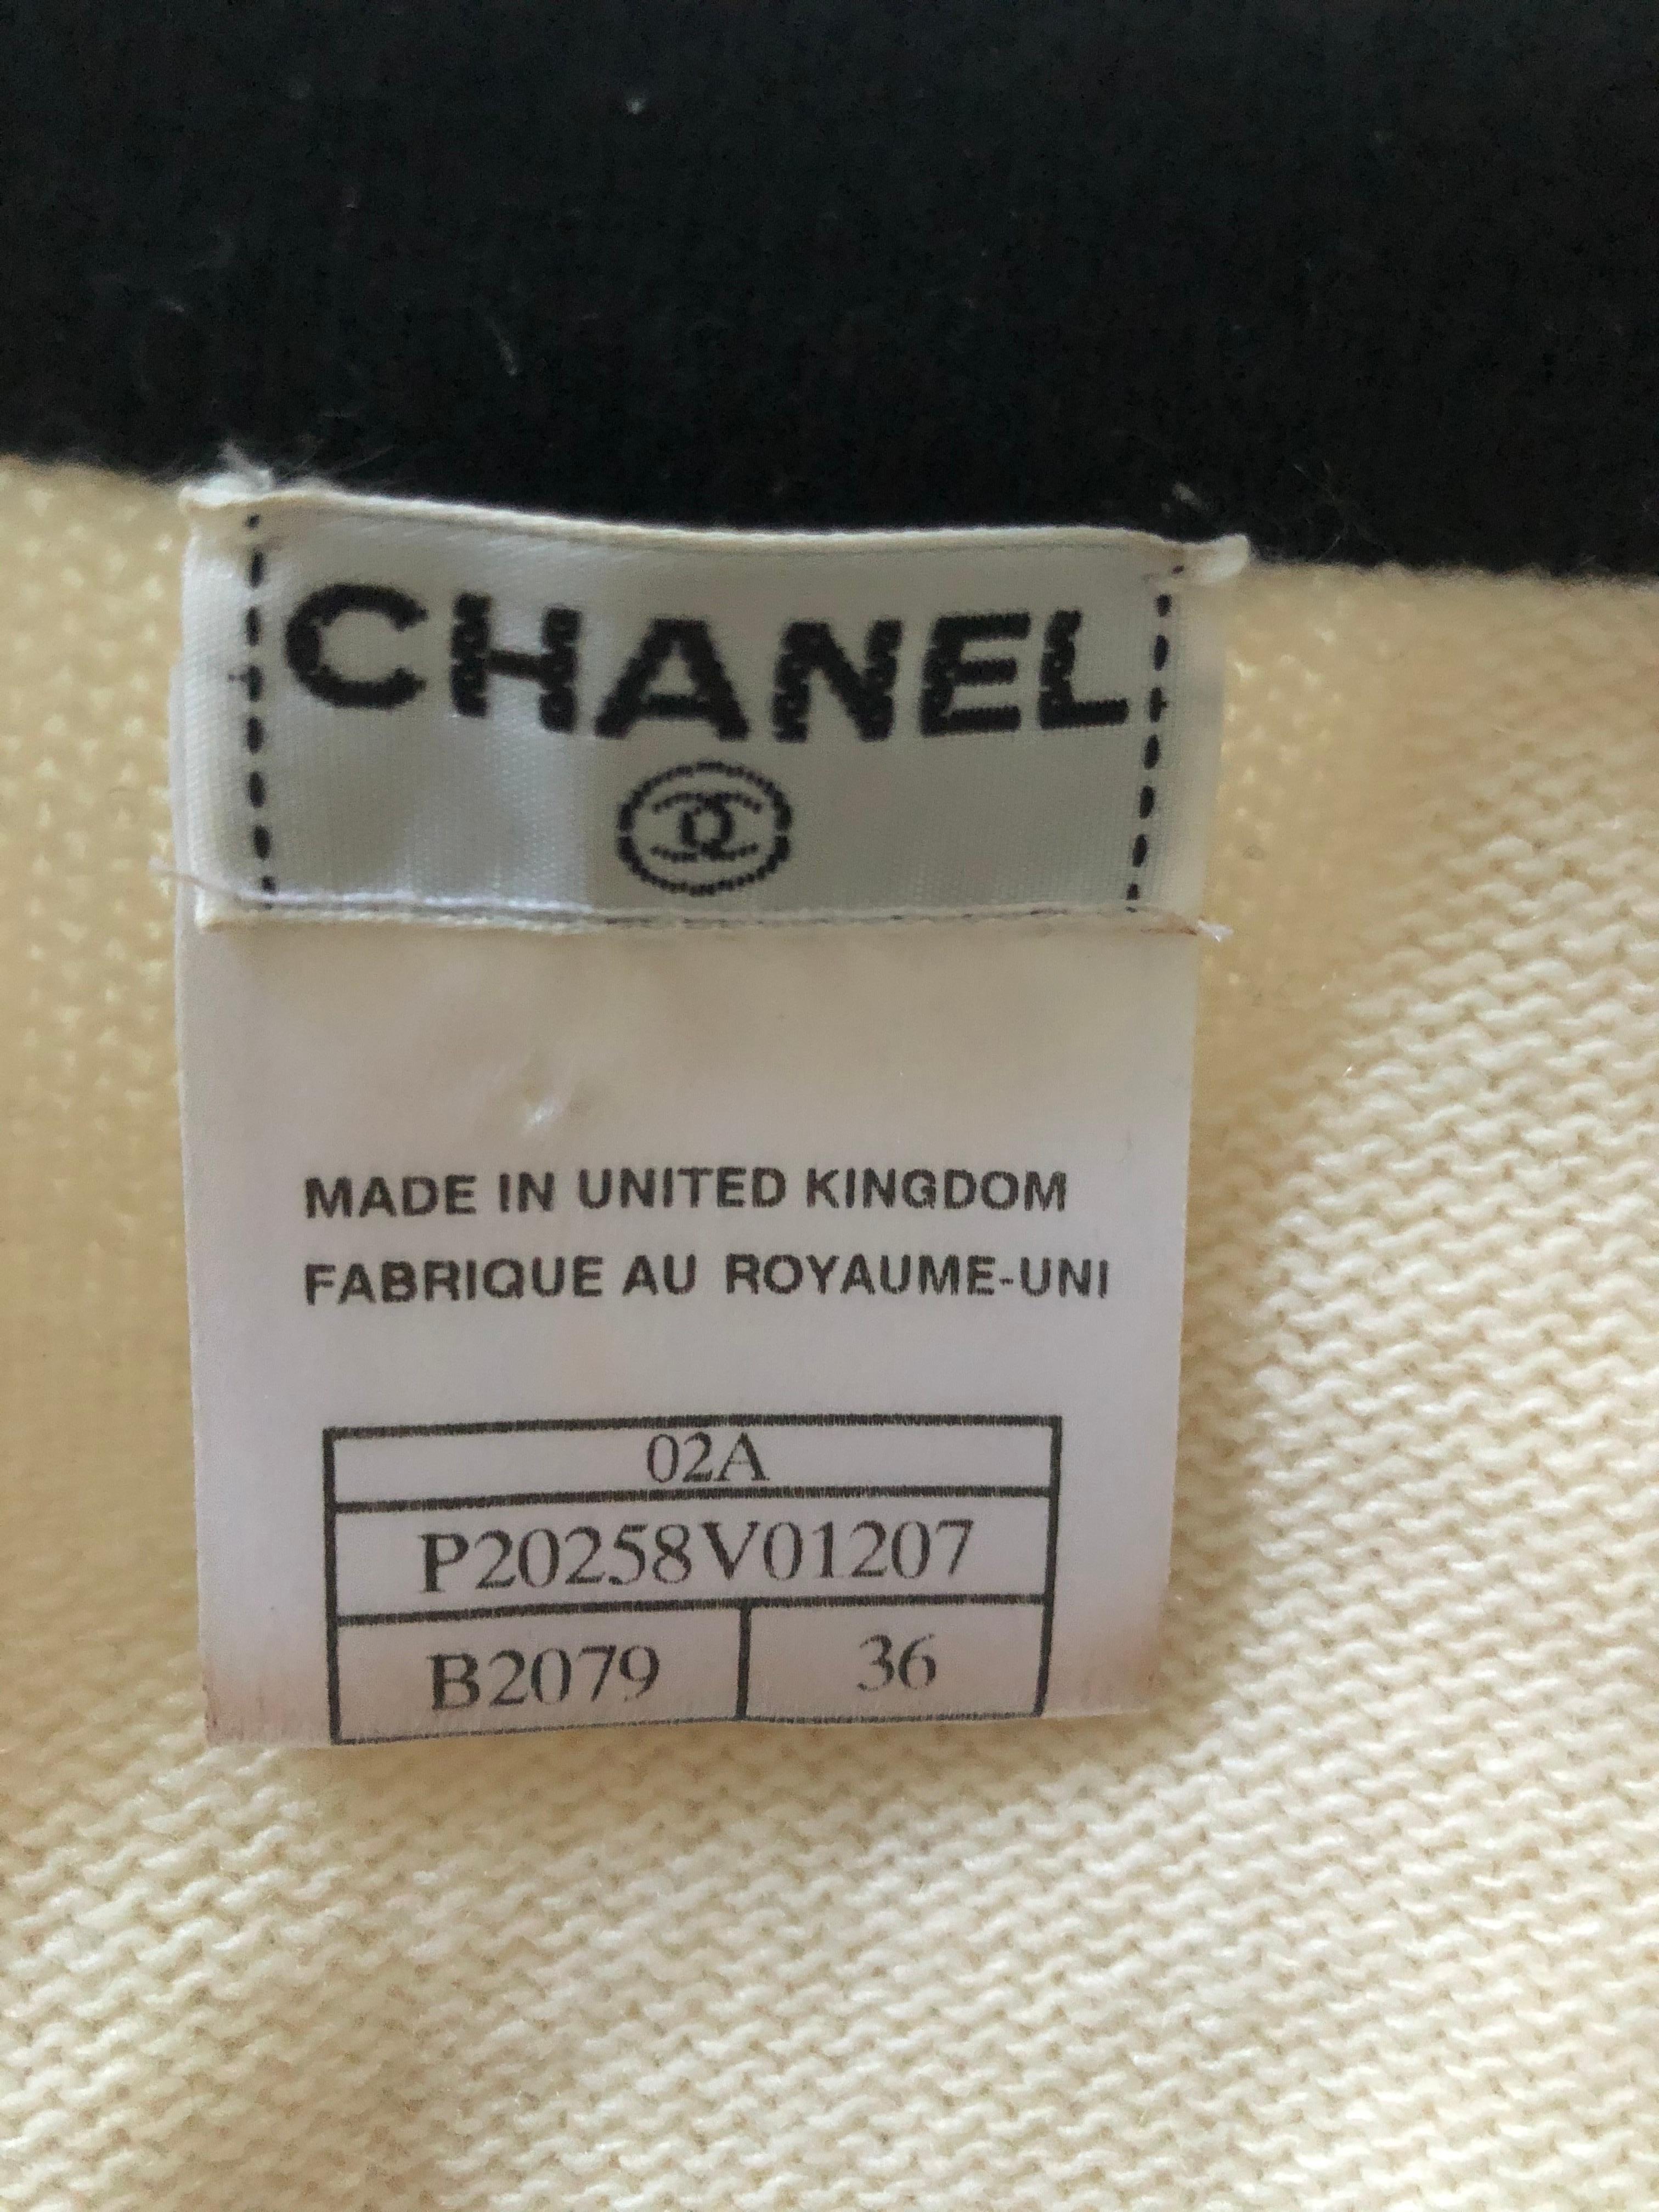 Chanel Cream and Black Cashmere Cardigan Size 36 Fr. 1